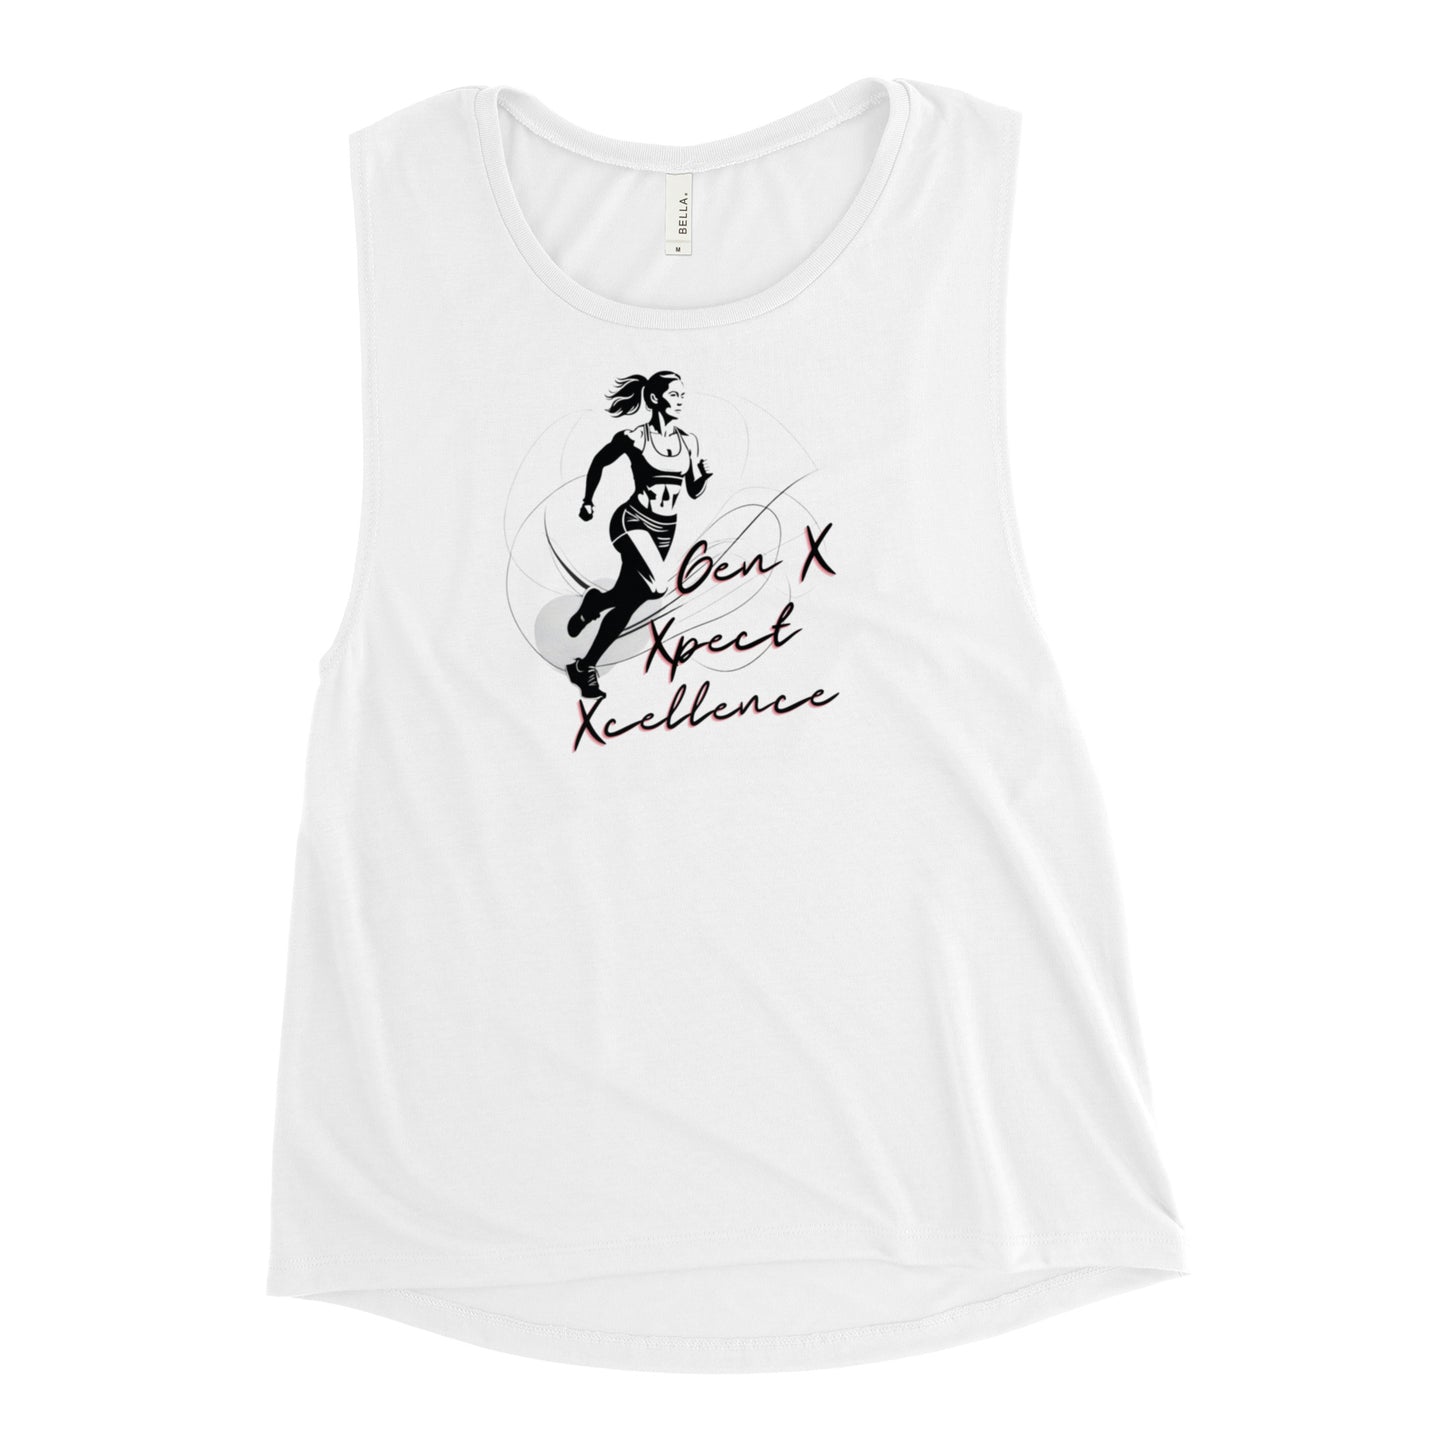 Xpect Xcellence: Women's GenX Graphic Tank